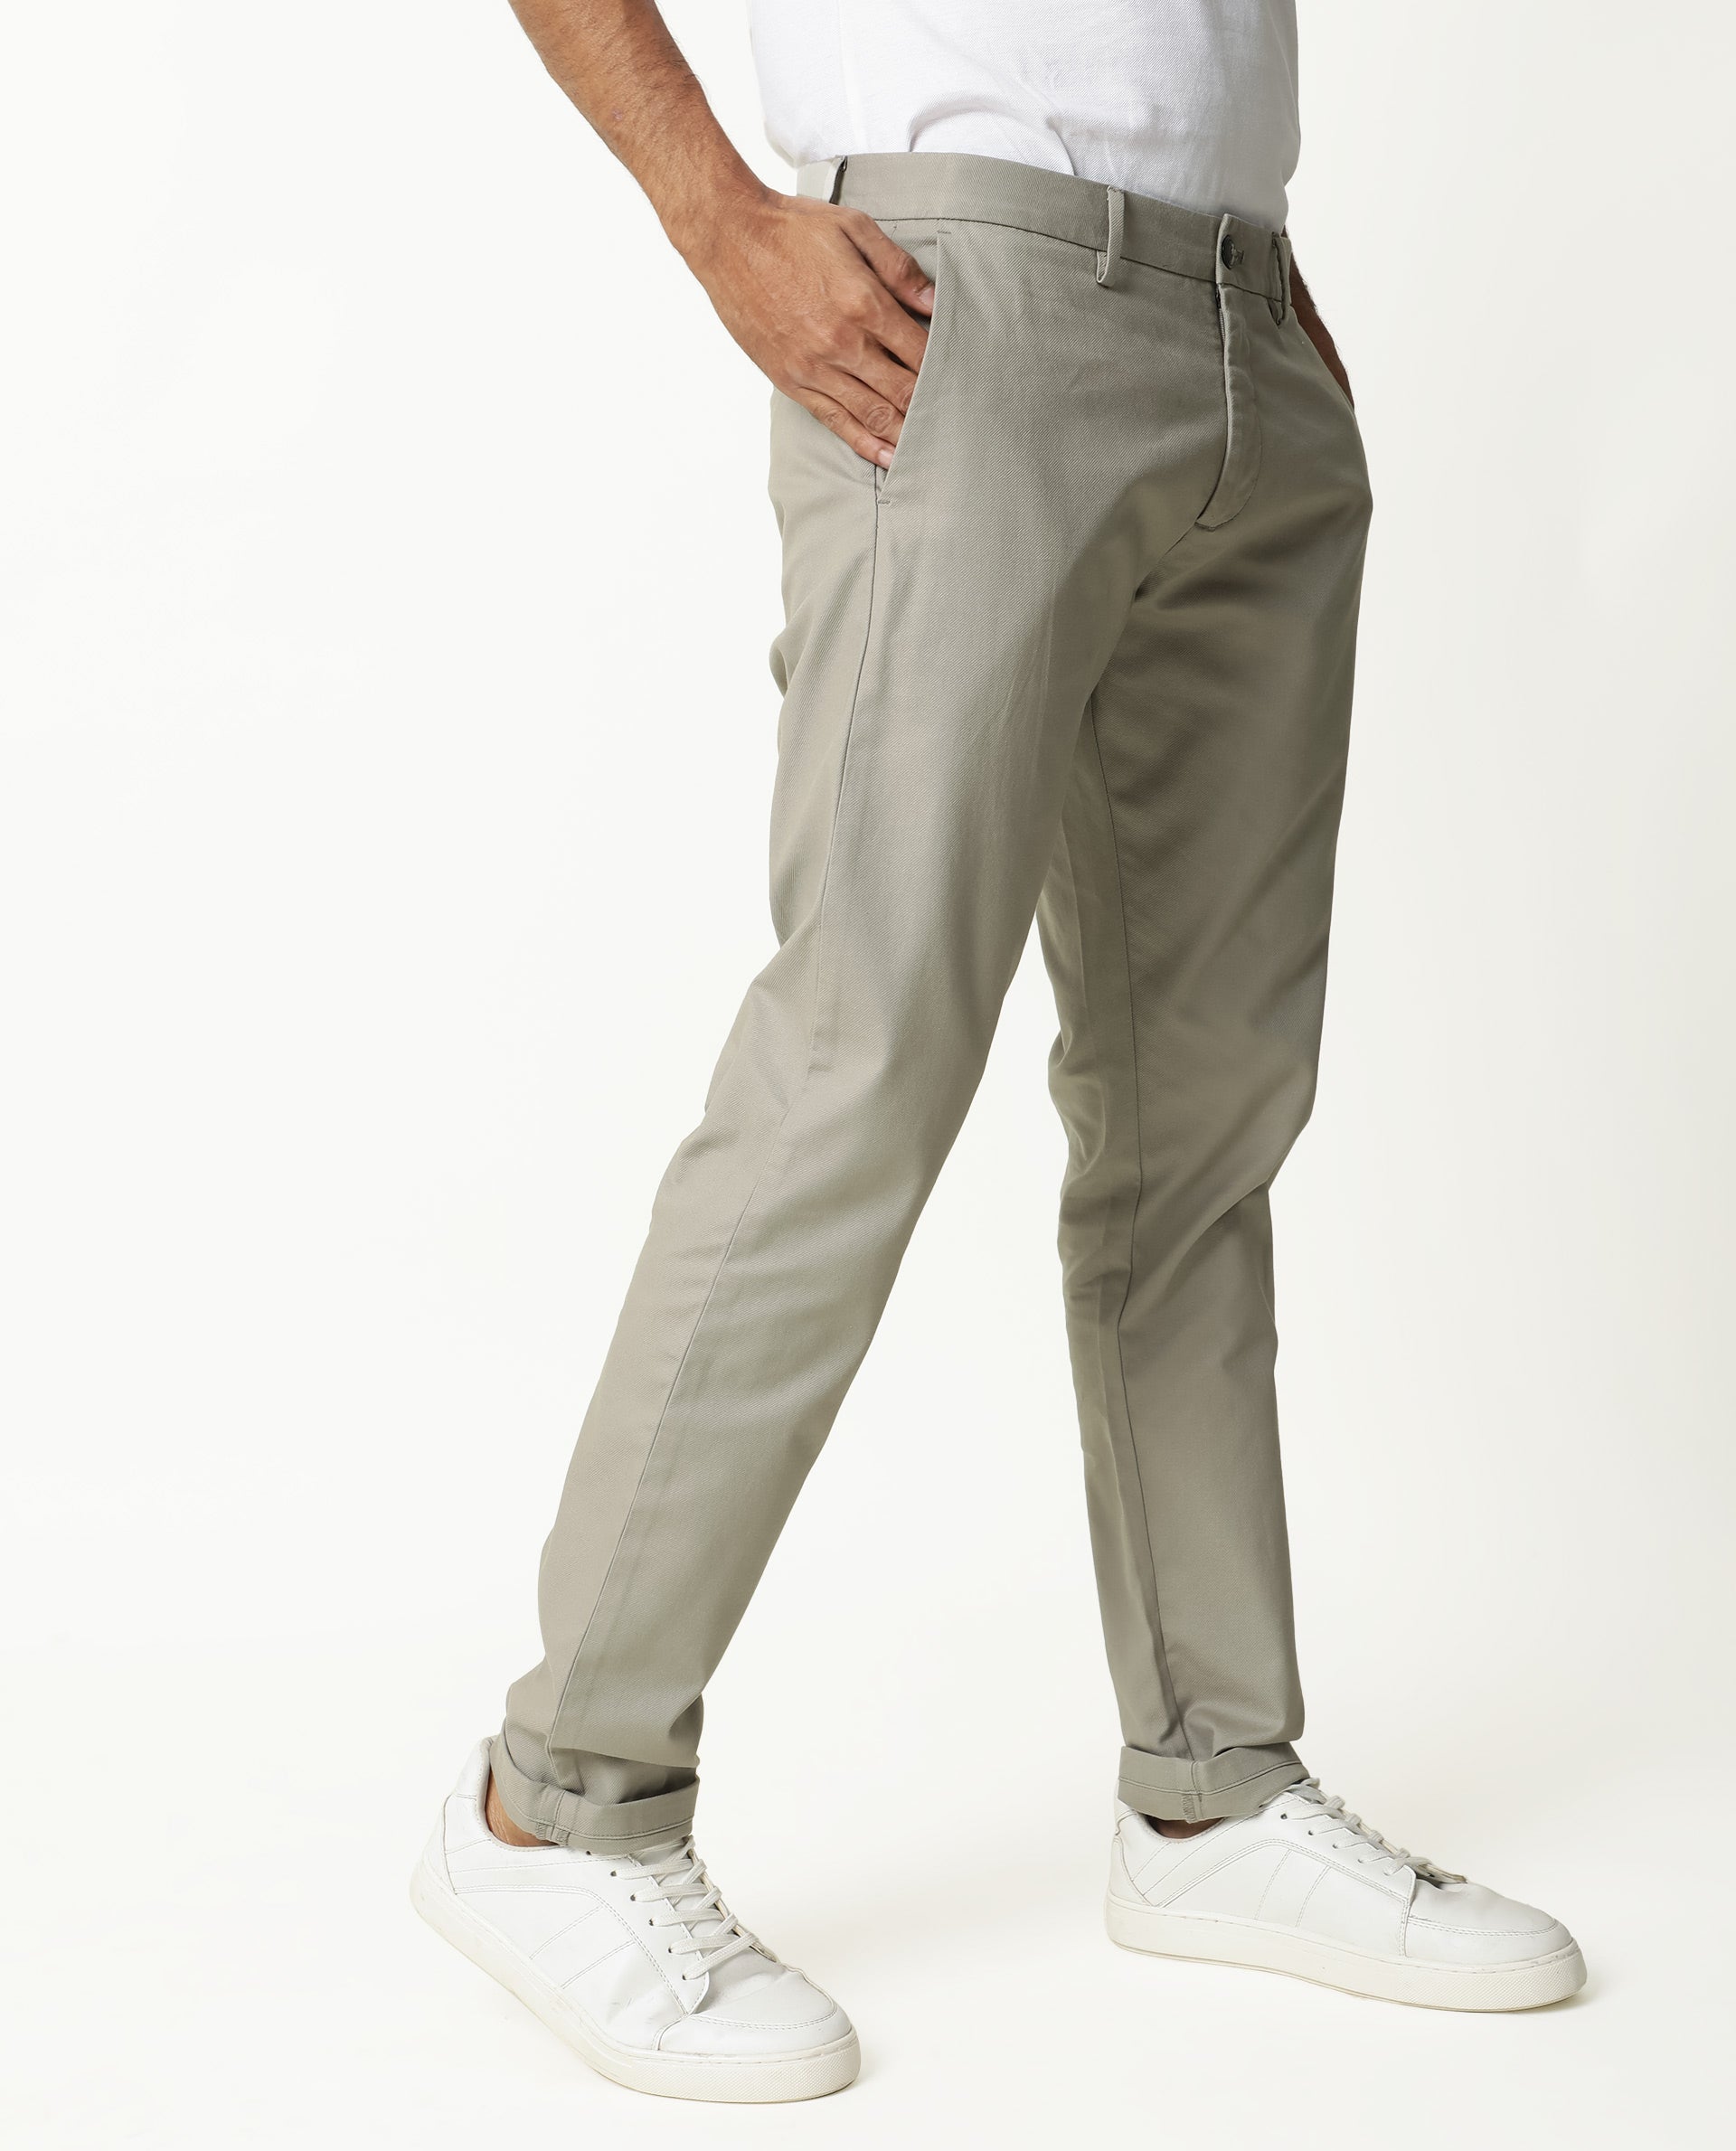 BASICS TAPERED FIT OBSIDIAN BROWN COTTON STRETCH TROUSERS-23BTR50257